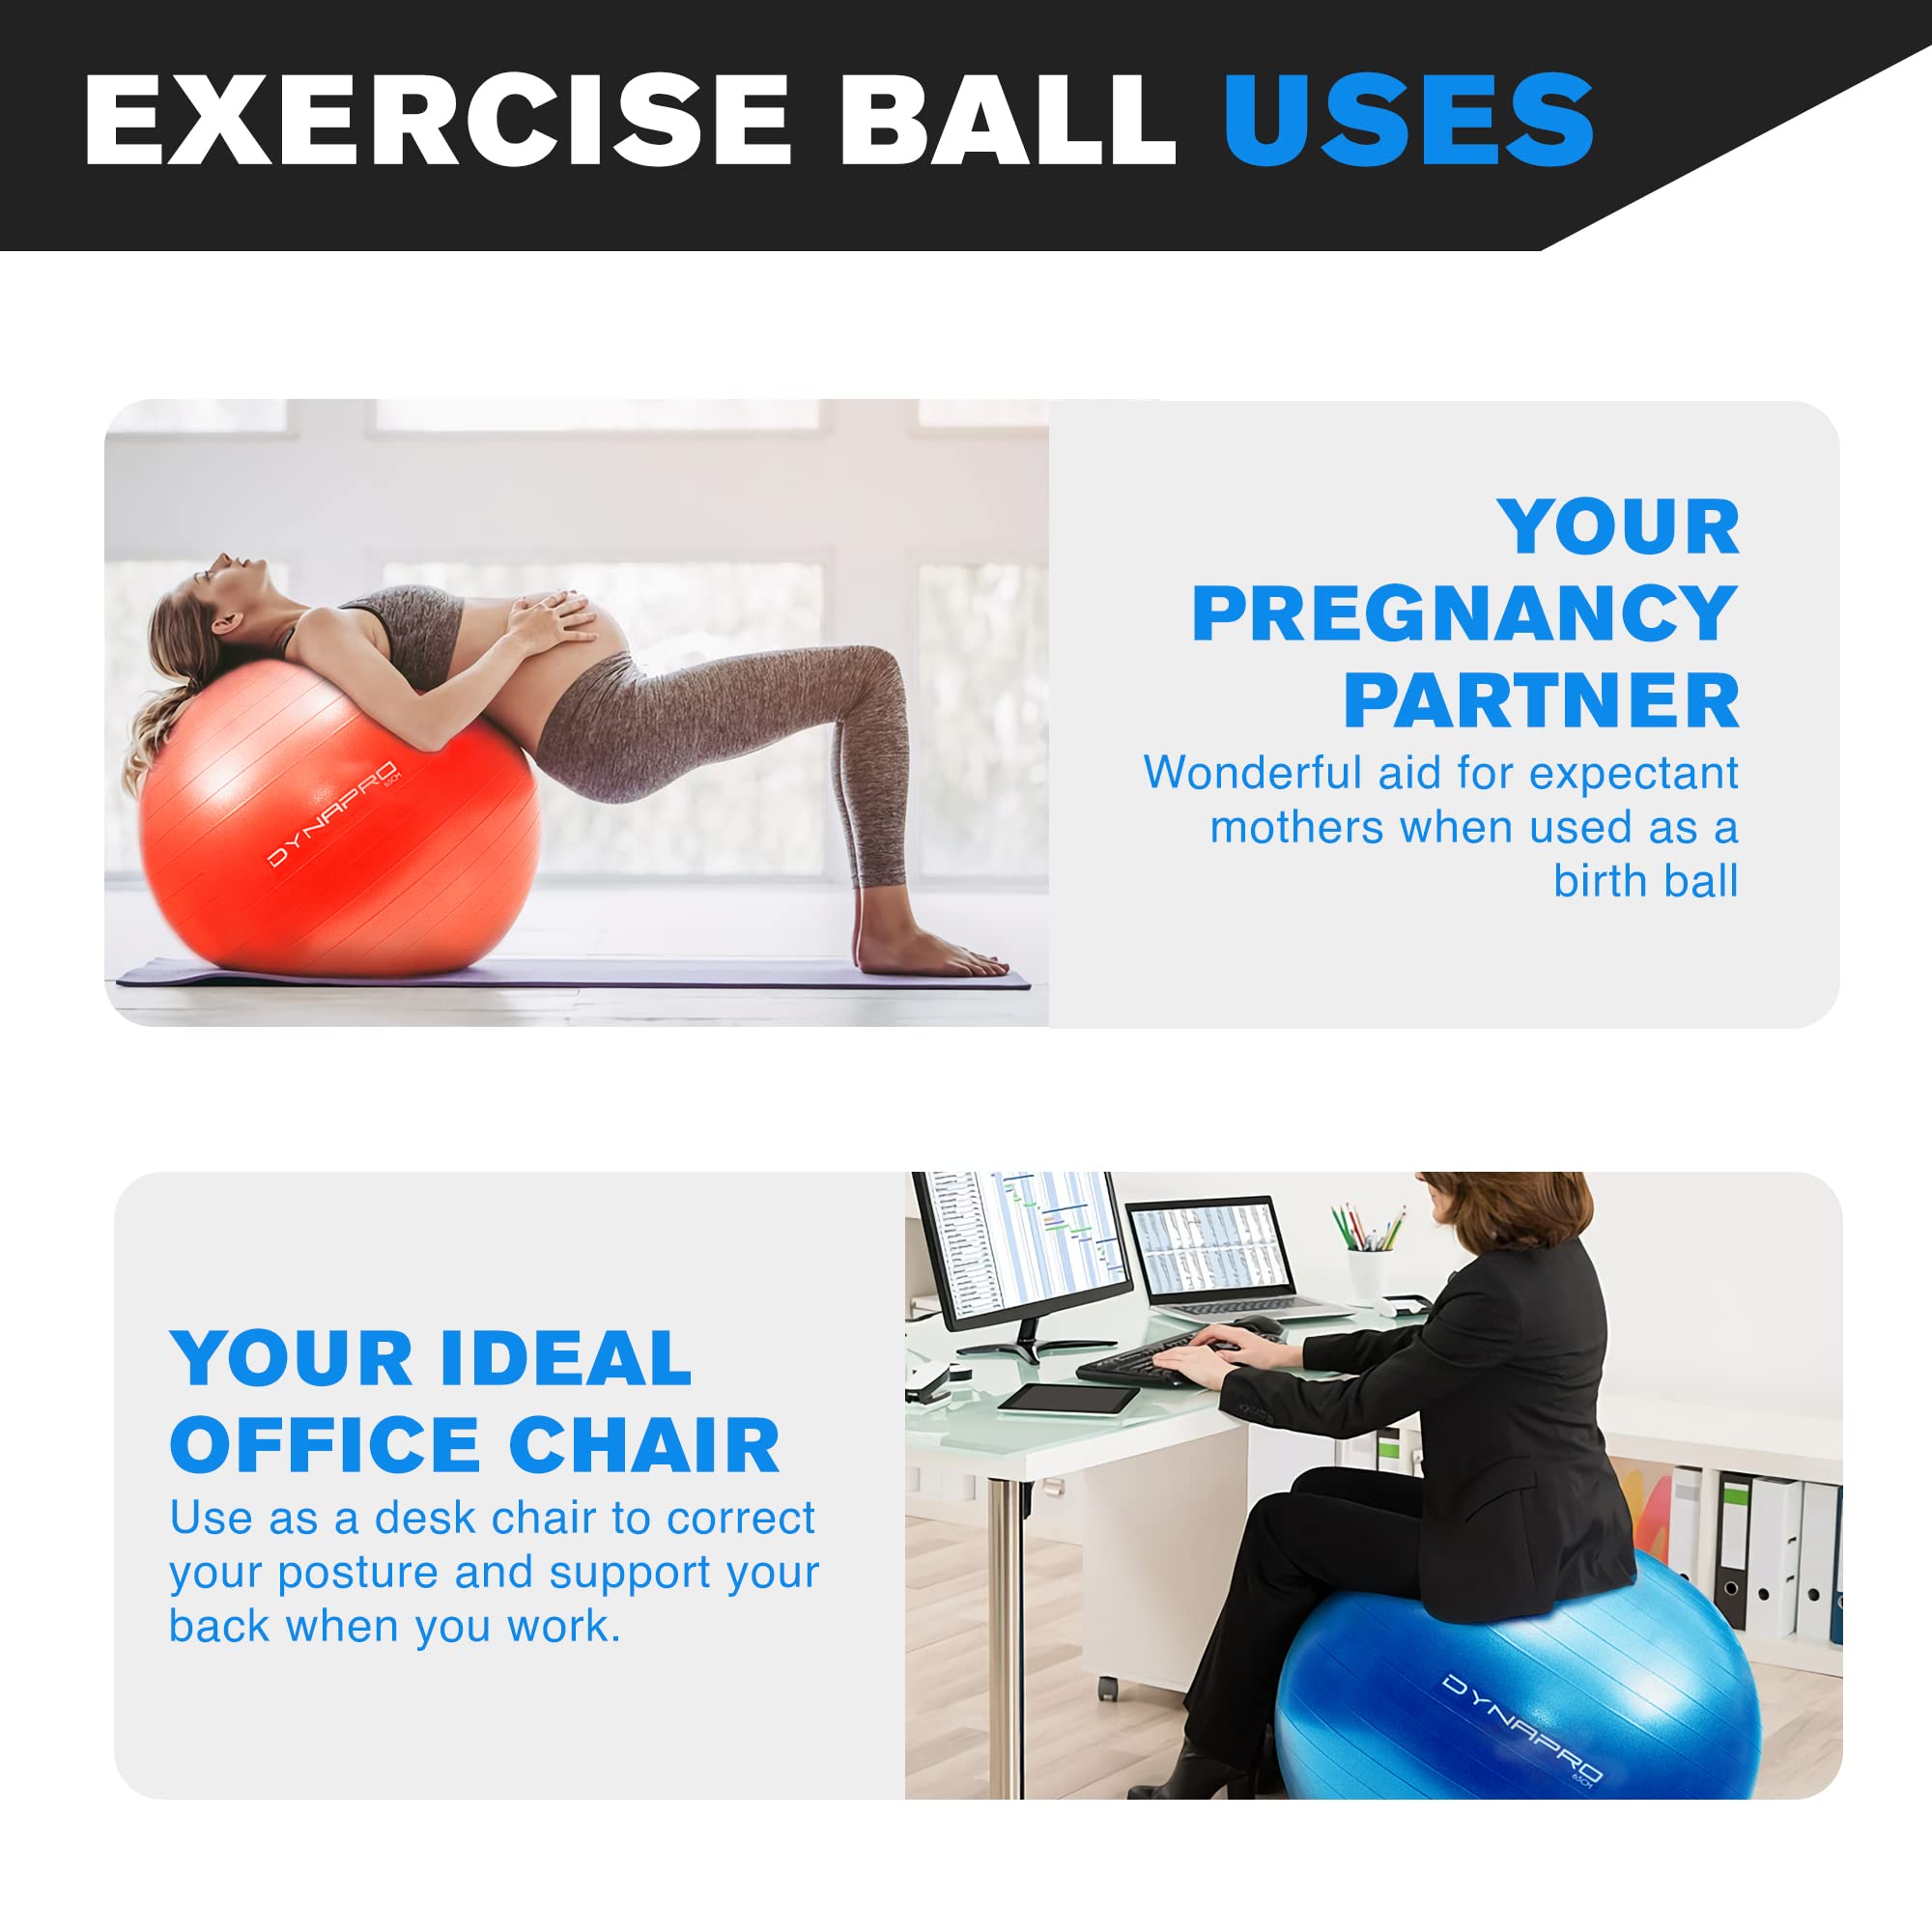 DYNAPRO Exercise Ball – Extra Thick Eco-Friendly & Anti-Burst Material Supports over 2200lbs, Stability Ball for Home, Yoga, Gym Ball, Birthing Ball, Physio Ball, Swiss Ball, Physical Therapy or Pregnancy